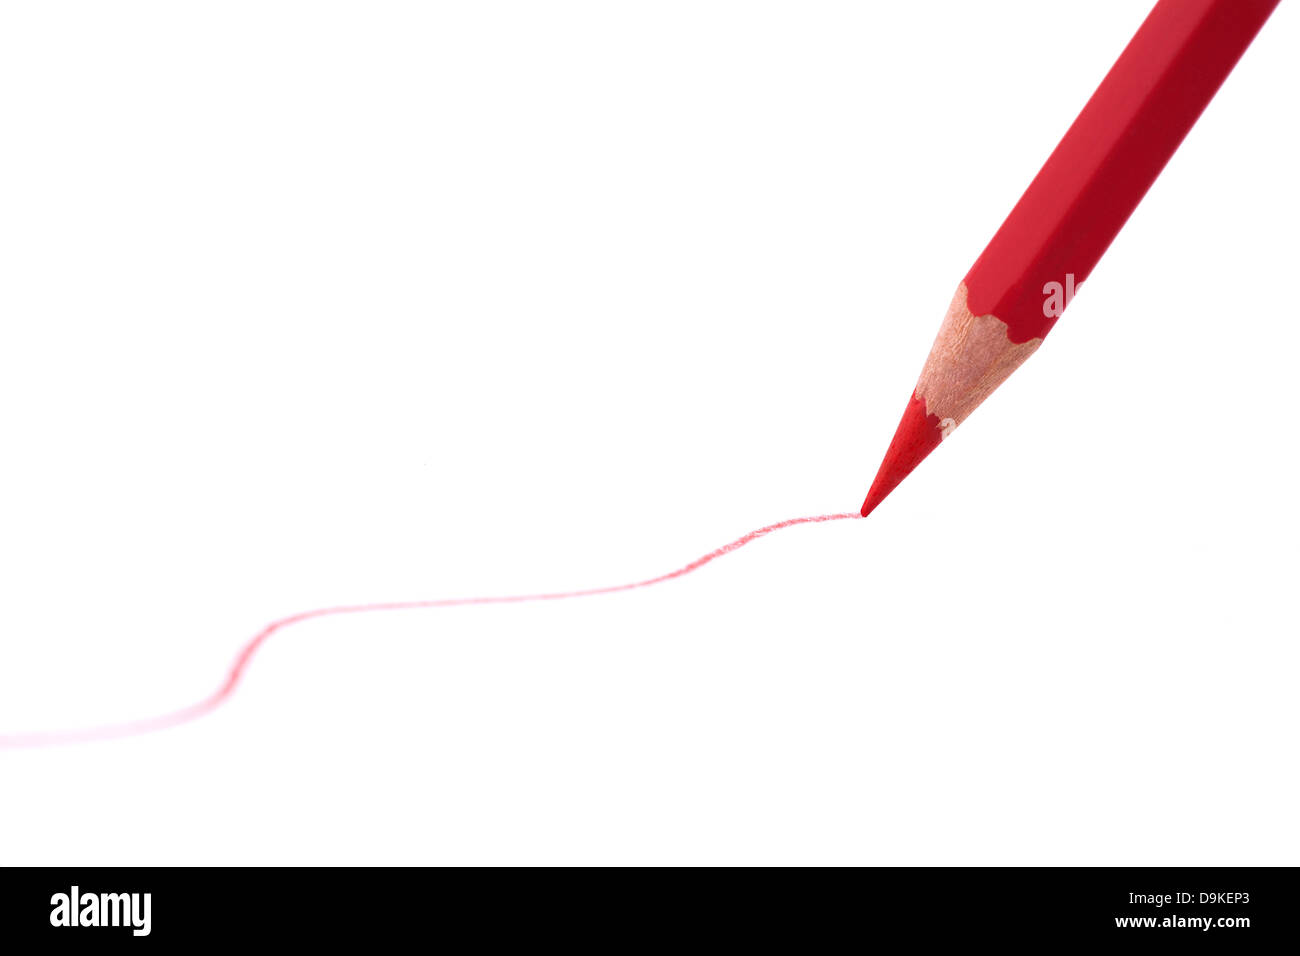 Drawing line with red pencil Stock Photo